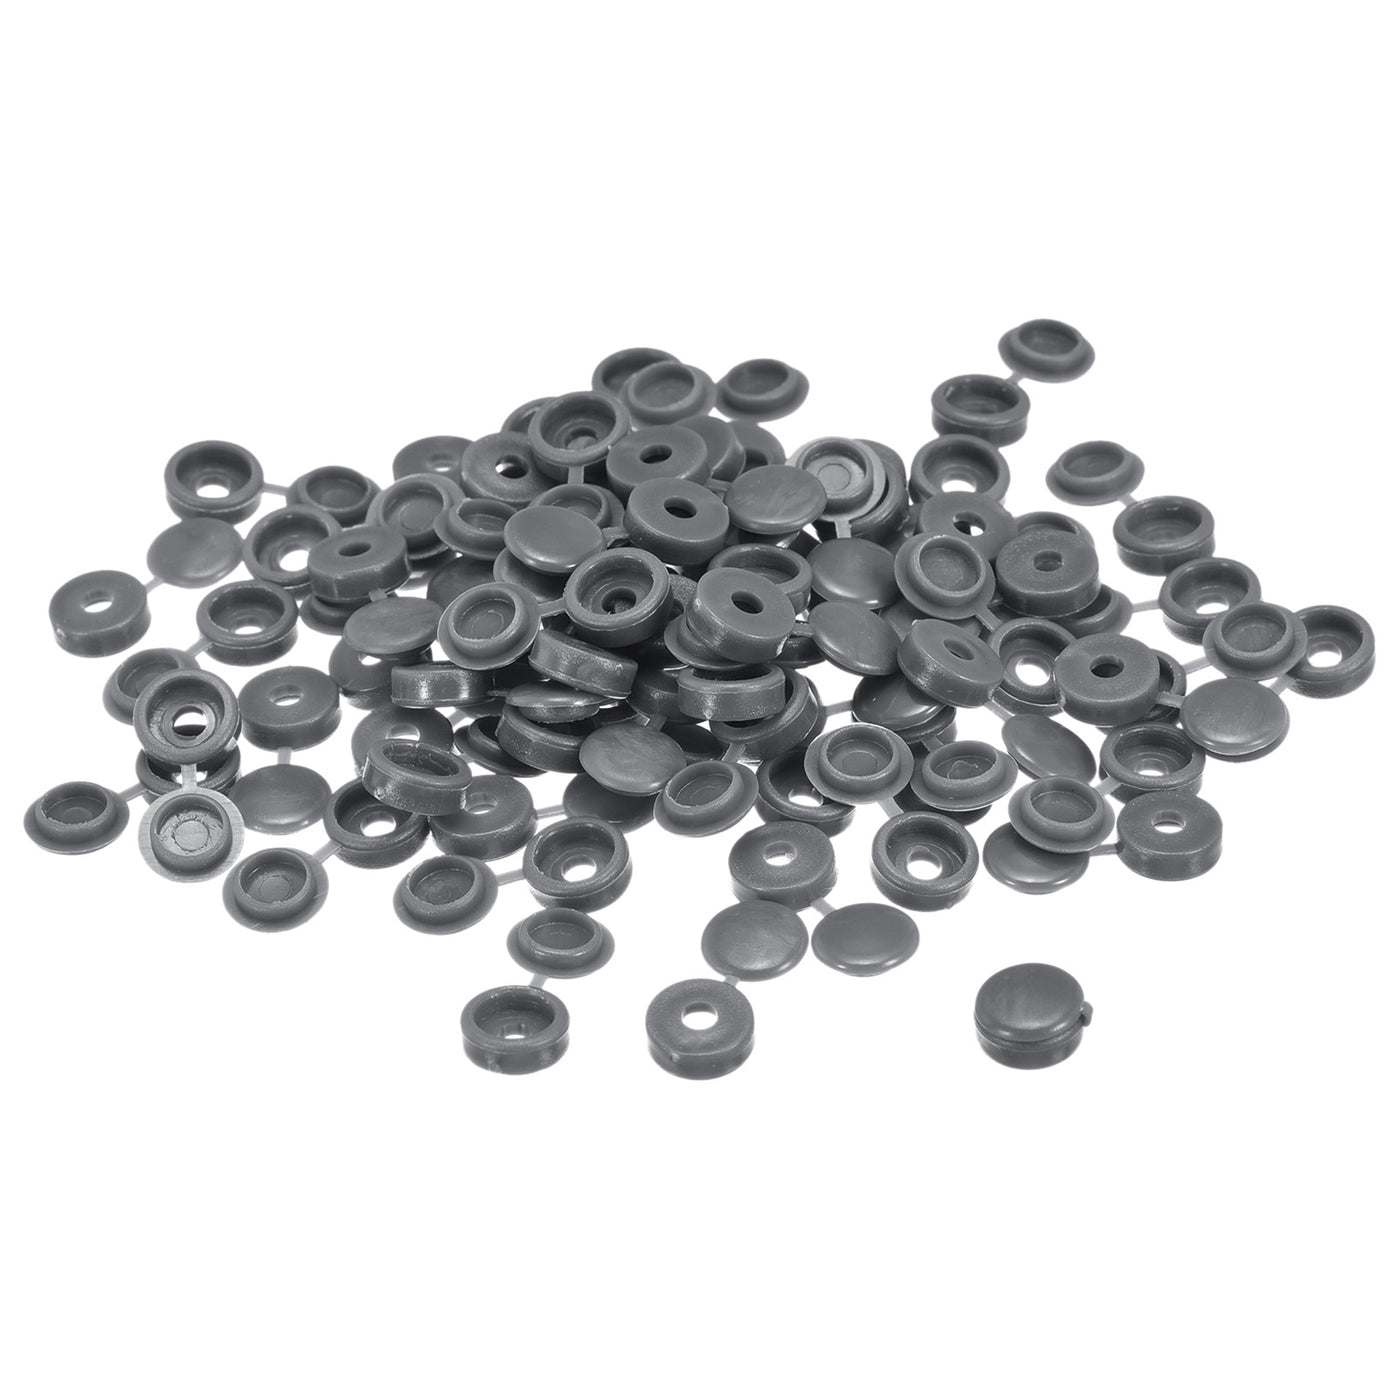 uxcell Uxcell 100Pcs 3mm Hinged Screw Cover Caps Plastic Fold Screw Snap Covers, Dark Gray